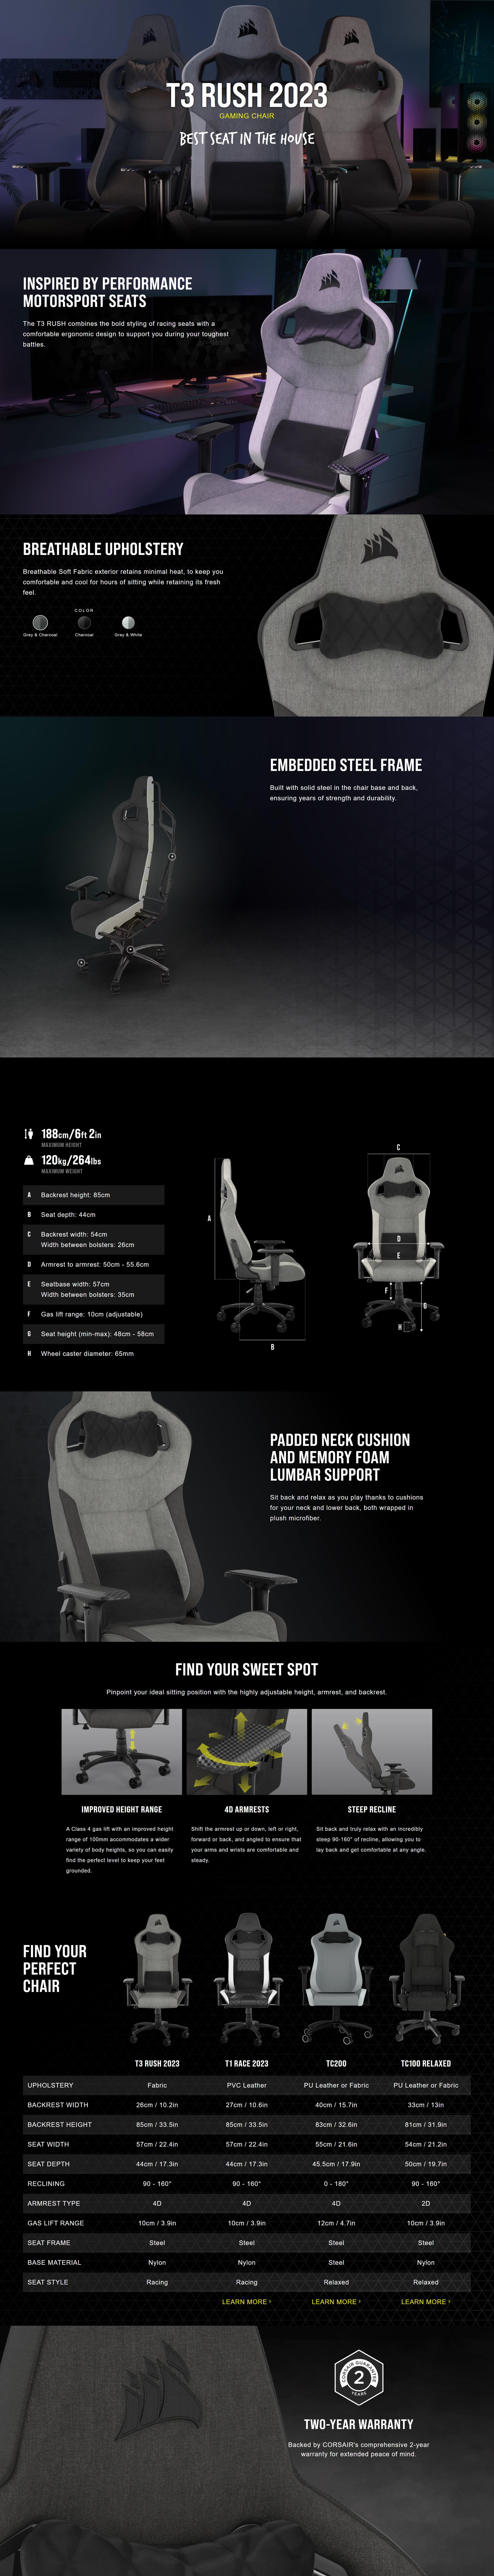 A large marketing image providing additional information about the product Corsair T3 RUSH Gaming Chair (2023) - Gray/White - Additional alt info not provided